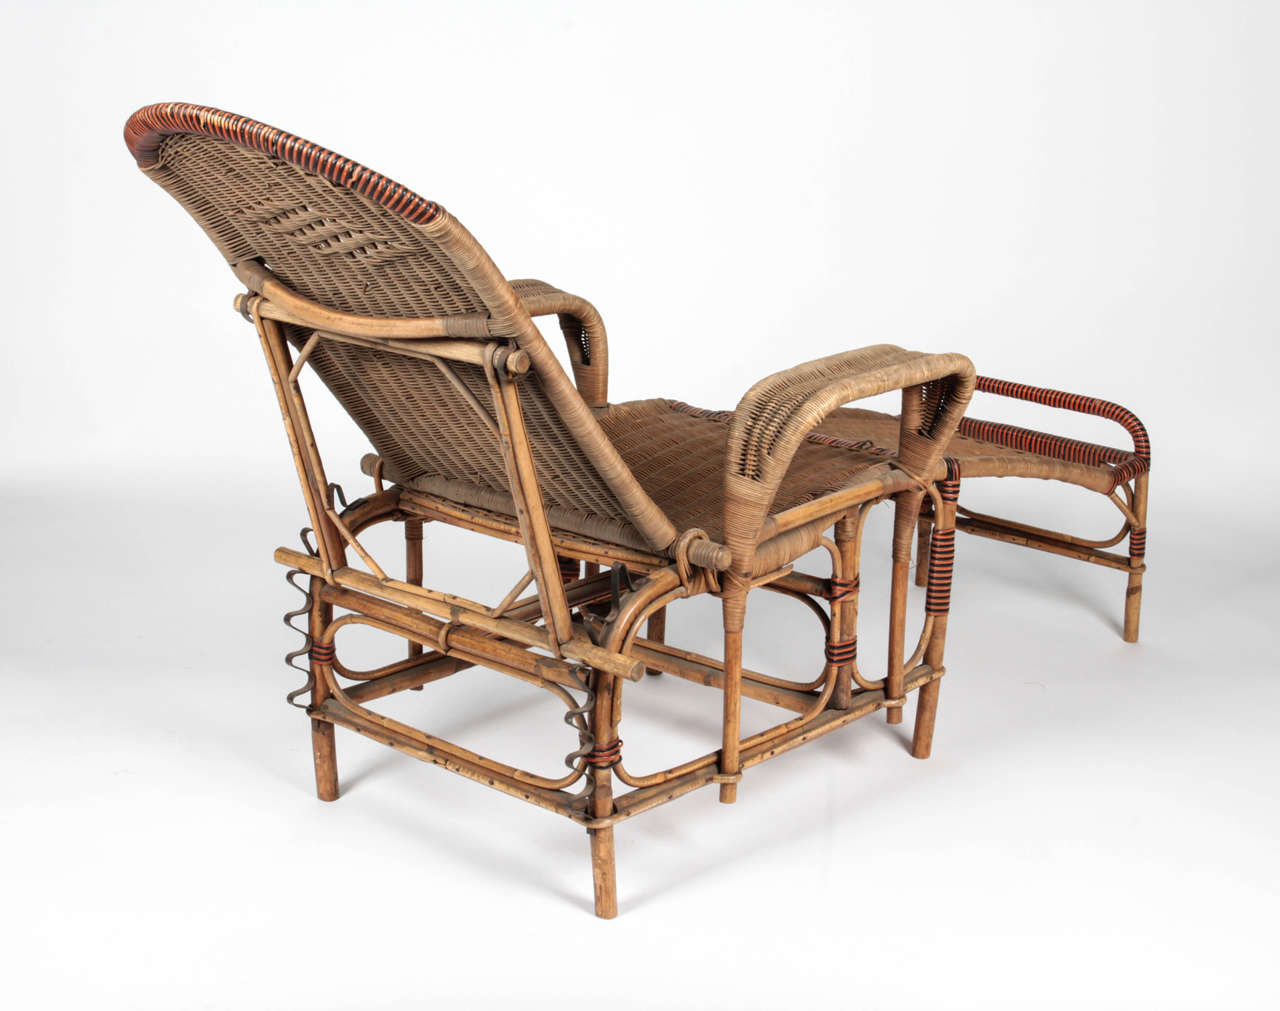 20th Century Art Deco Reclining Wicker Lounge Chair with Detachable Foot Rest